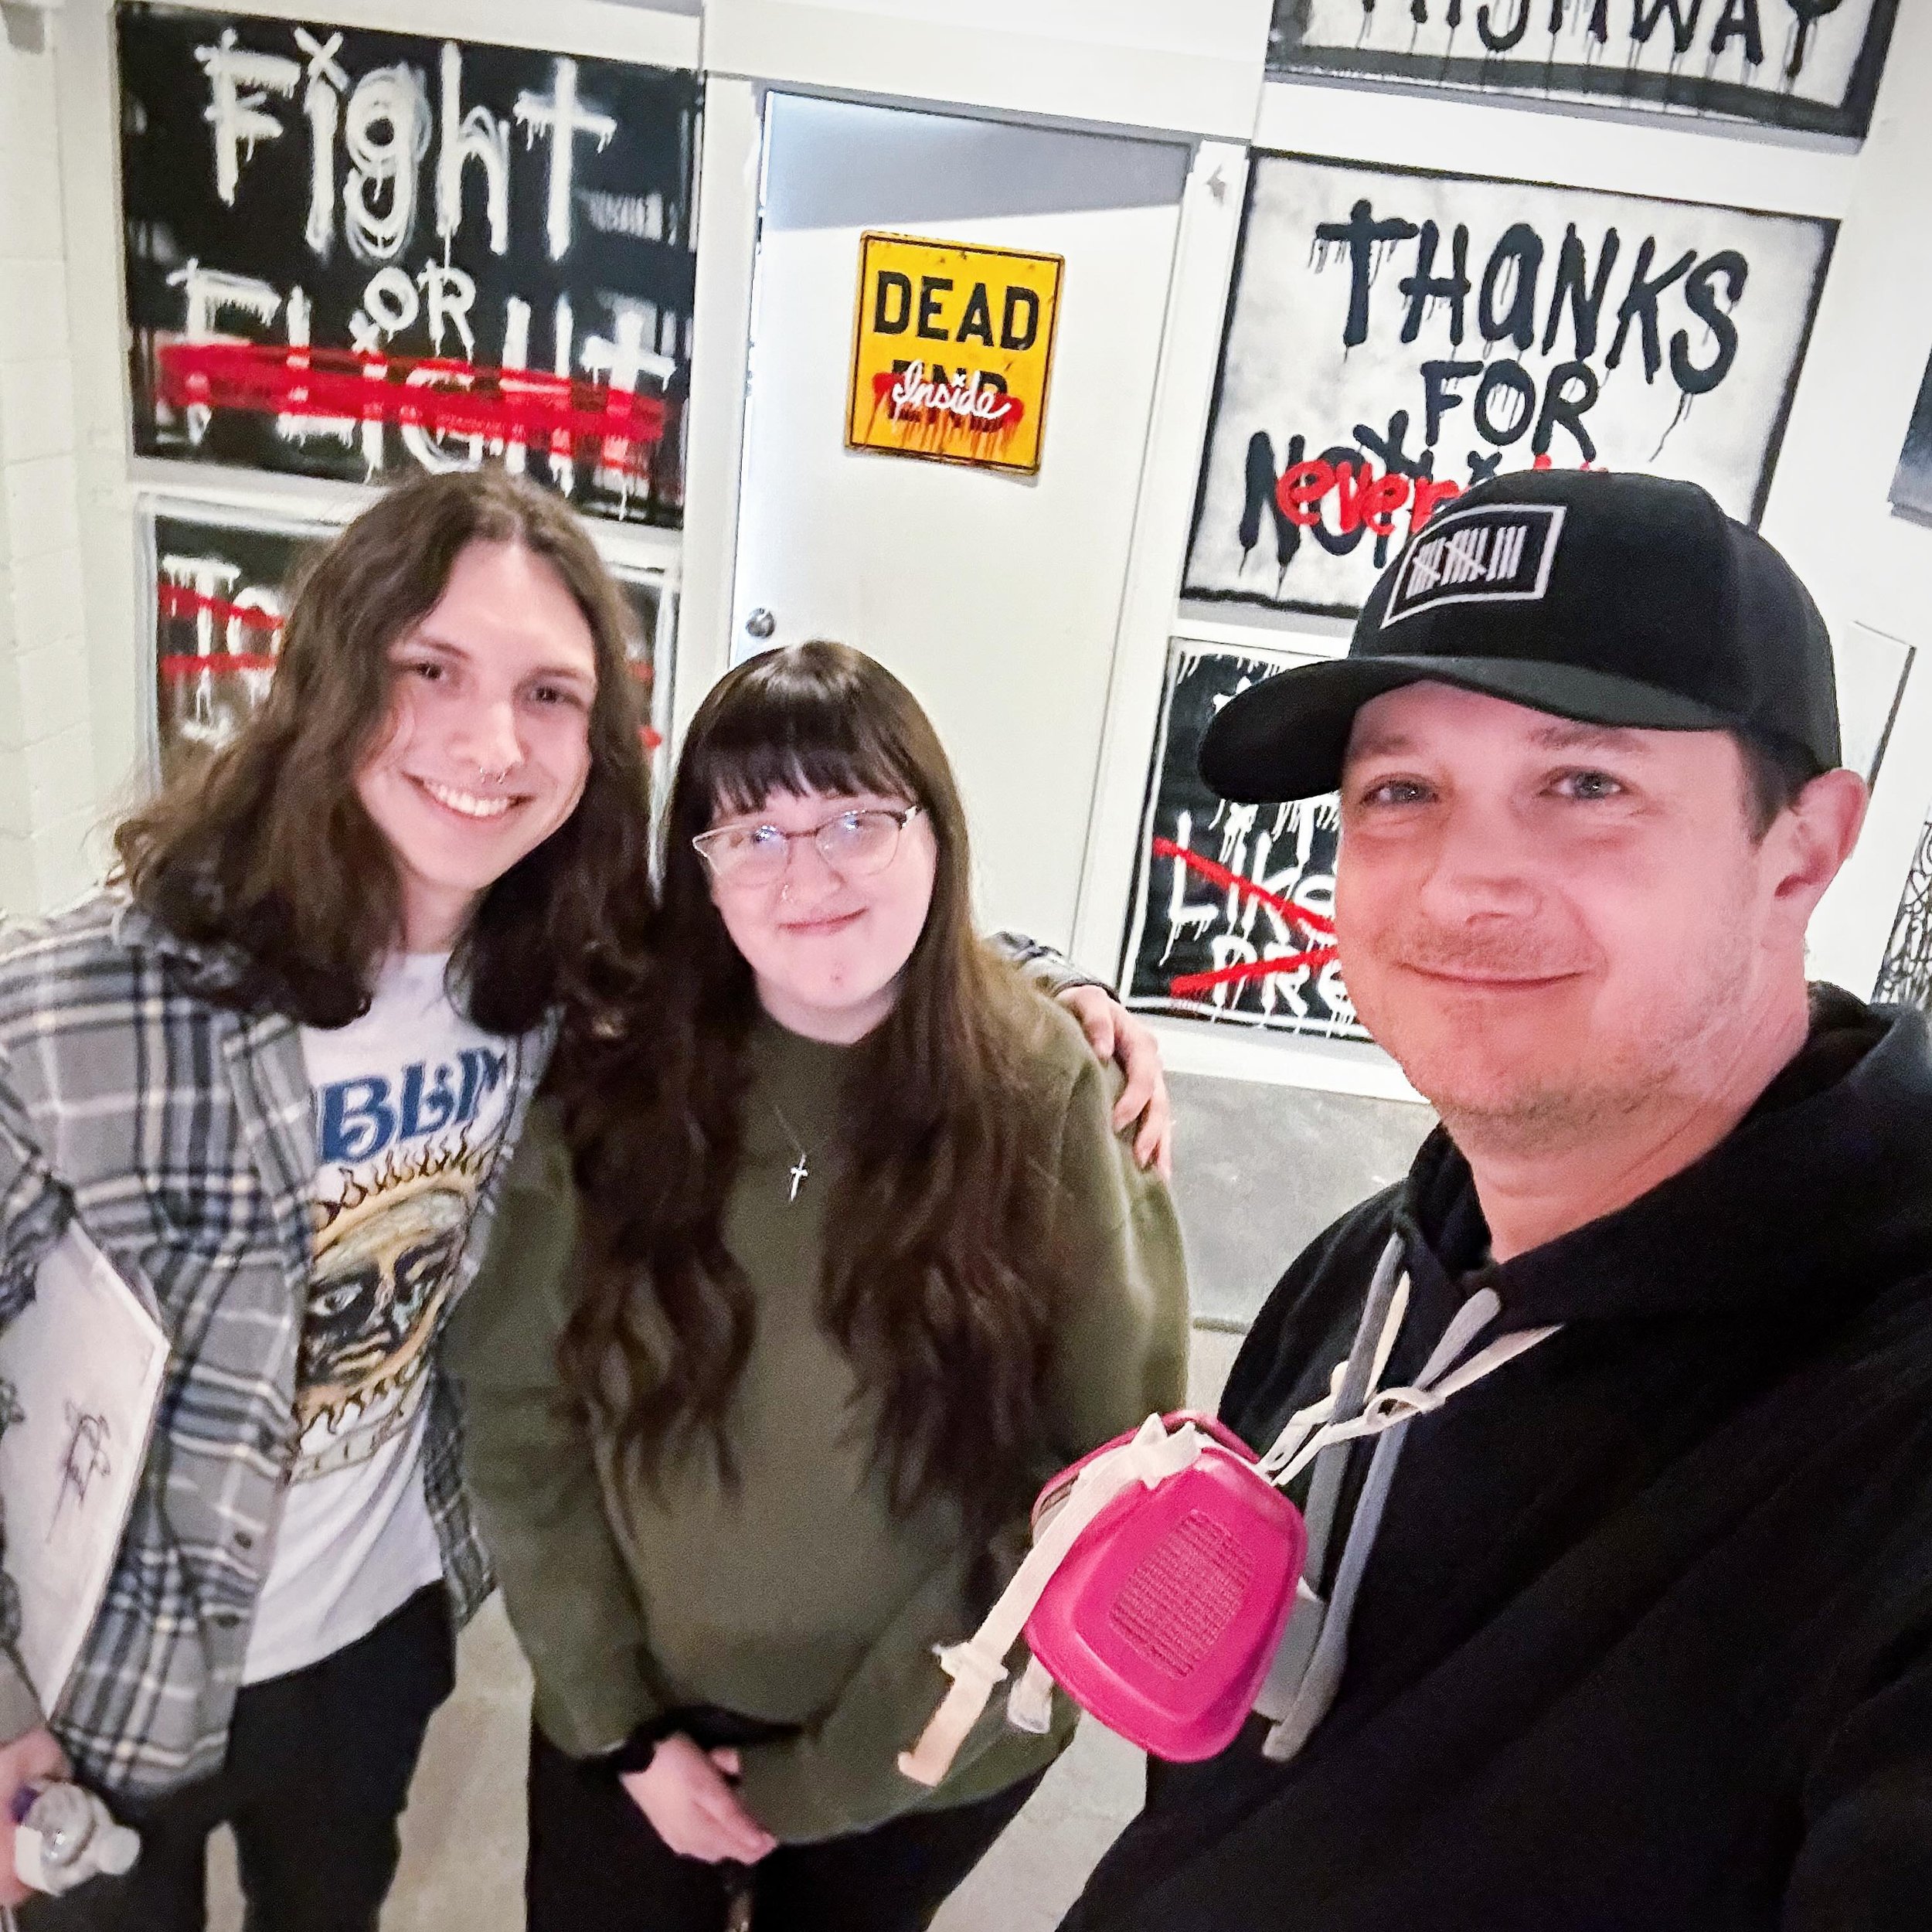 Thanks Aubrey and Eli for driving all the way from Tennessee to come check out my gallery. I had a really great time hanging out and shooting the shit with y&rsquo;all!

#artist #artgallery #gallery #galleryvisit #studiotour #artspace #arttour #galle